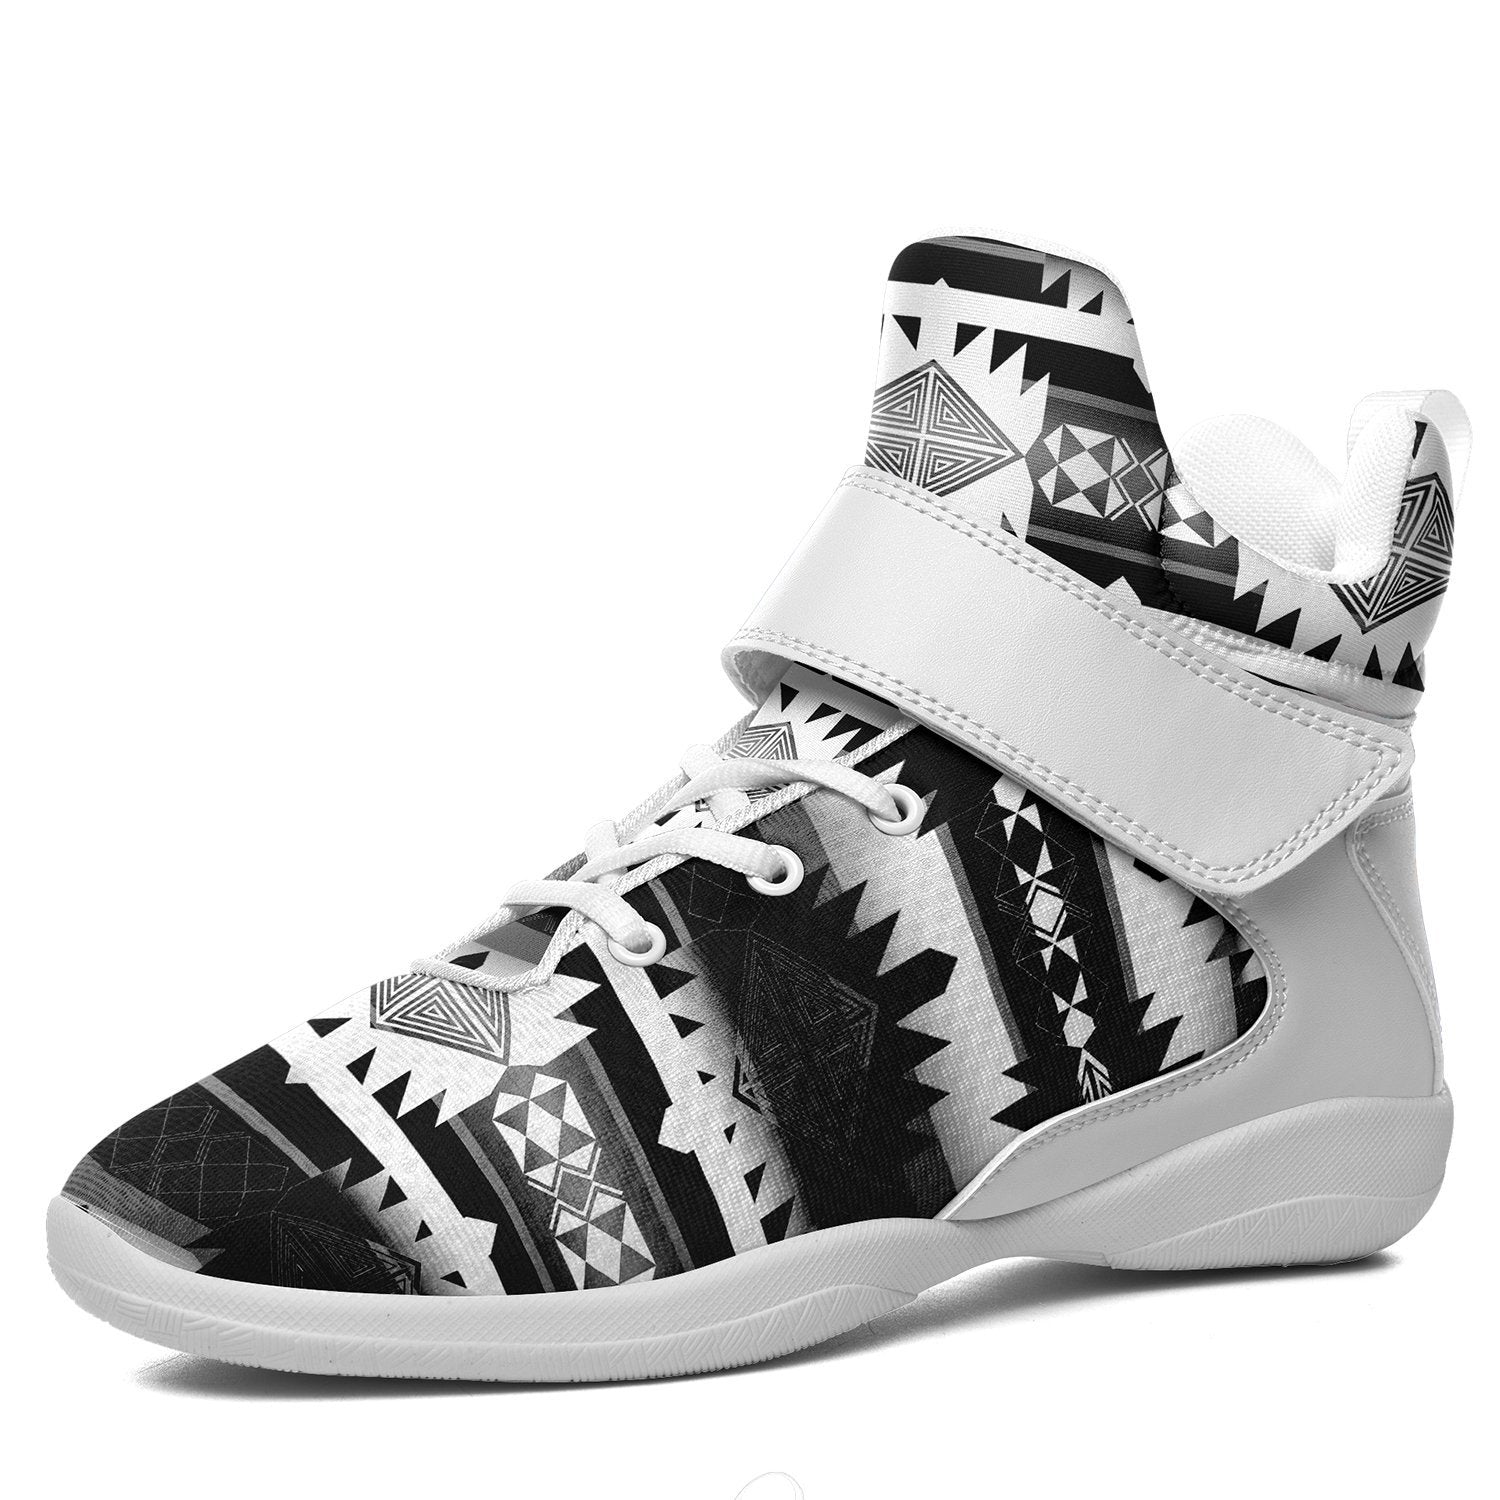 Okotoks Black and White Kid's Ipottaa Basketball / Sport High Top Shoes 49 Dzine US Child 12.5 / EUR 30 White Sole with White Strap 